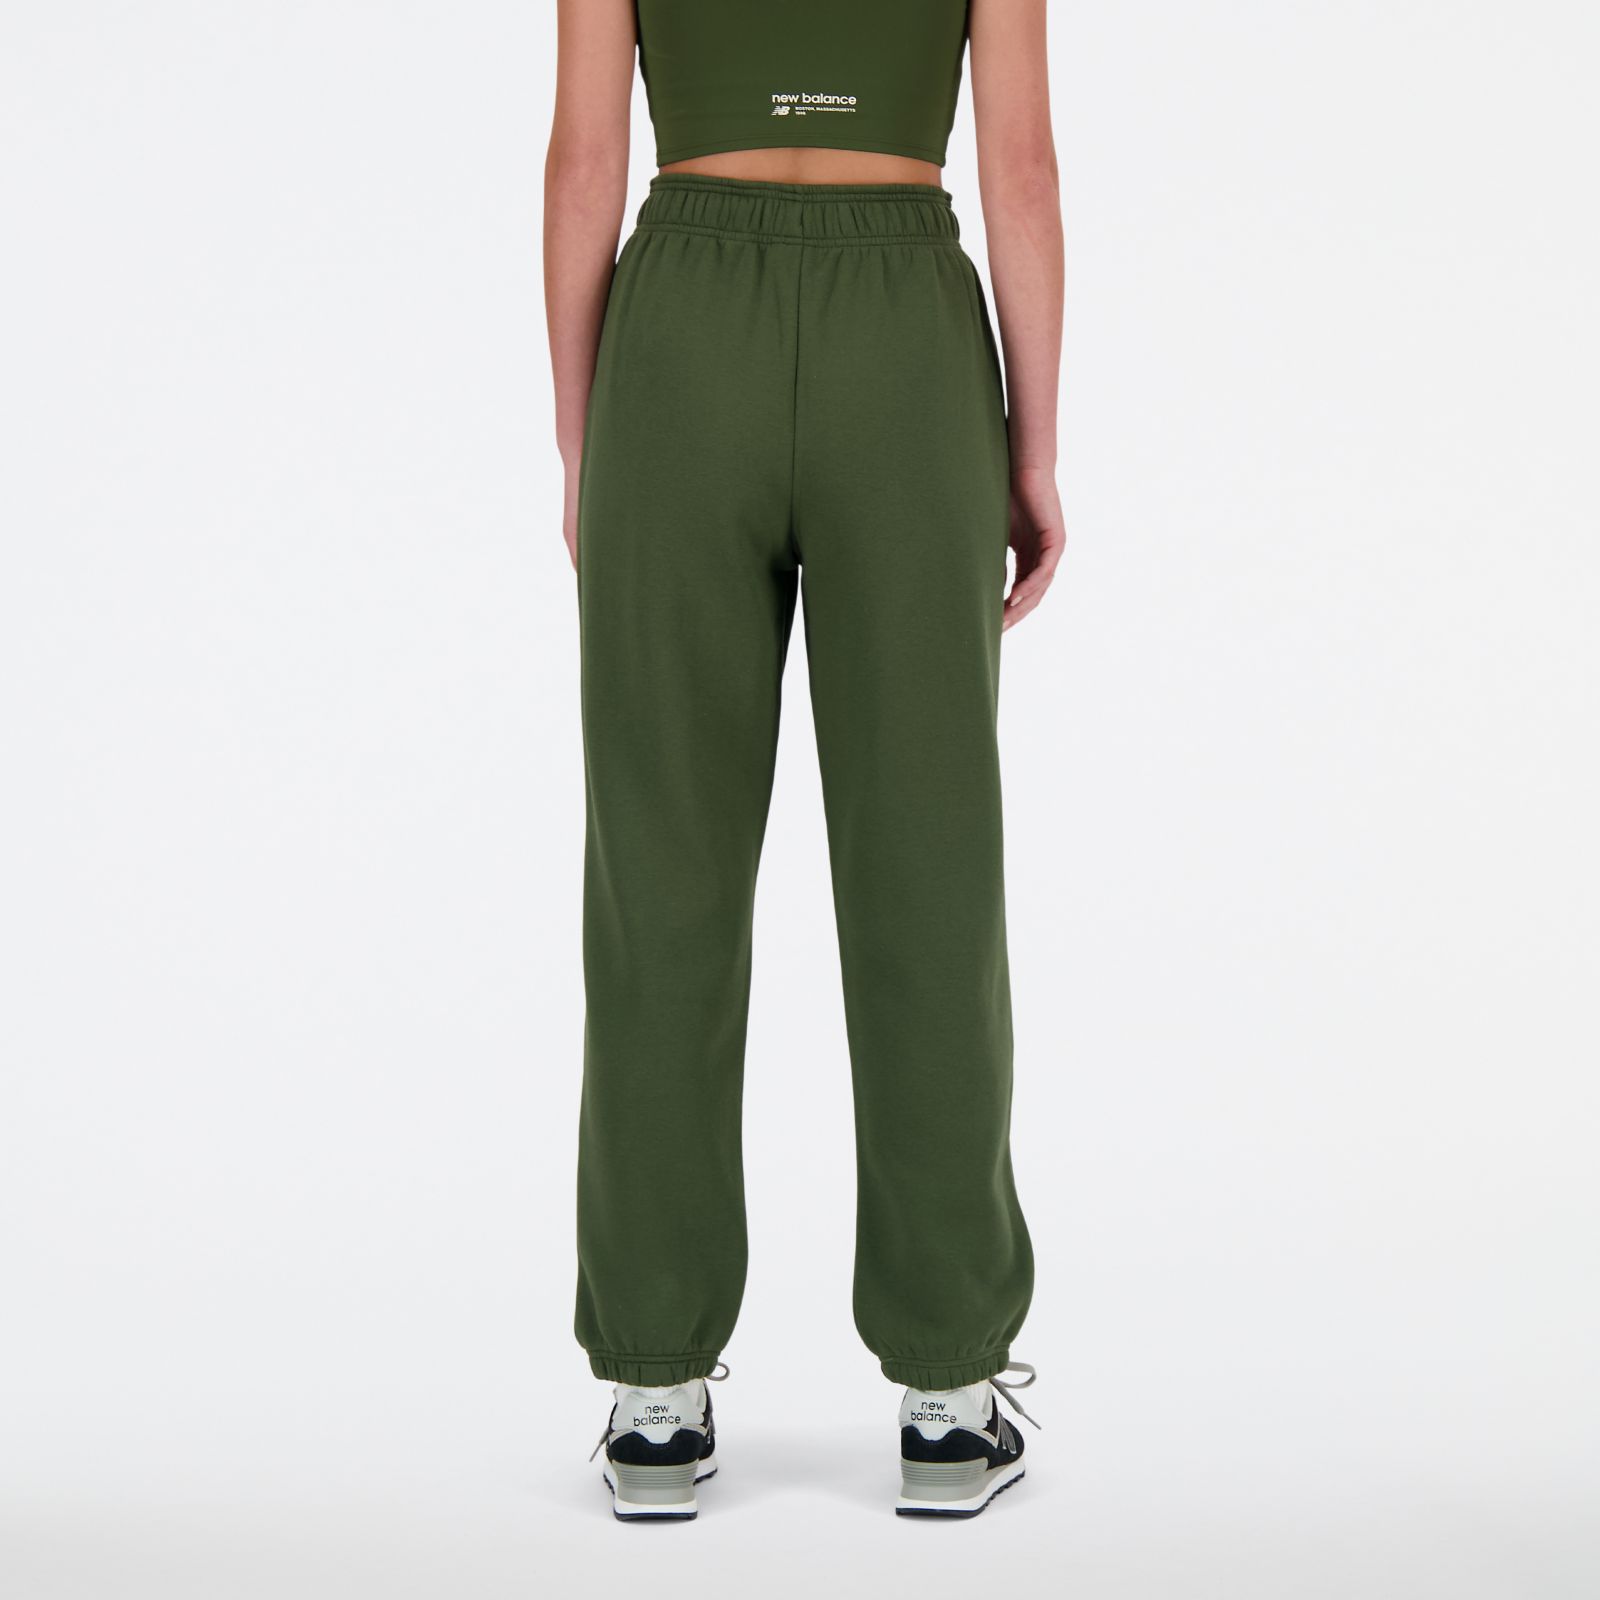 New Balance Joggers & Track Pants for Women sale - discounted